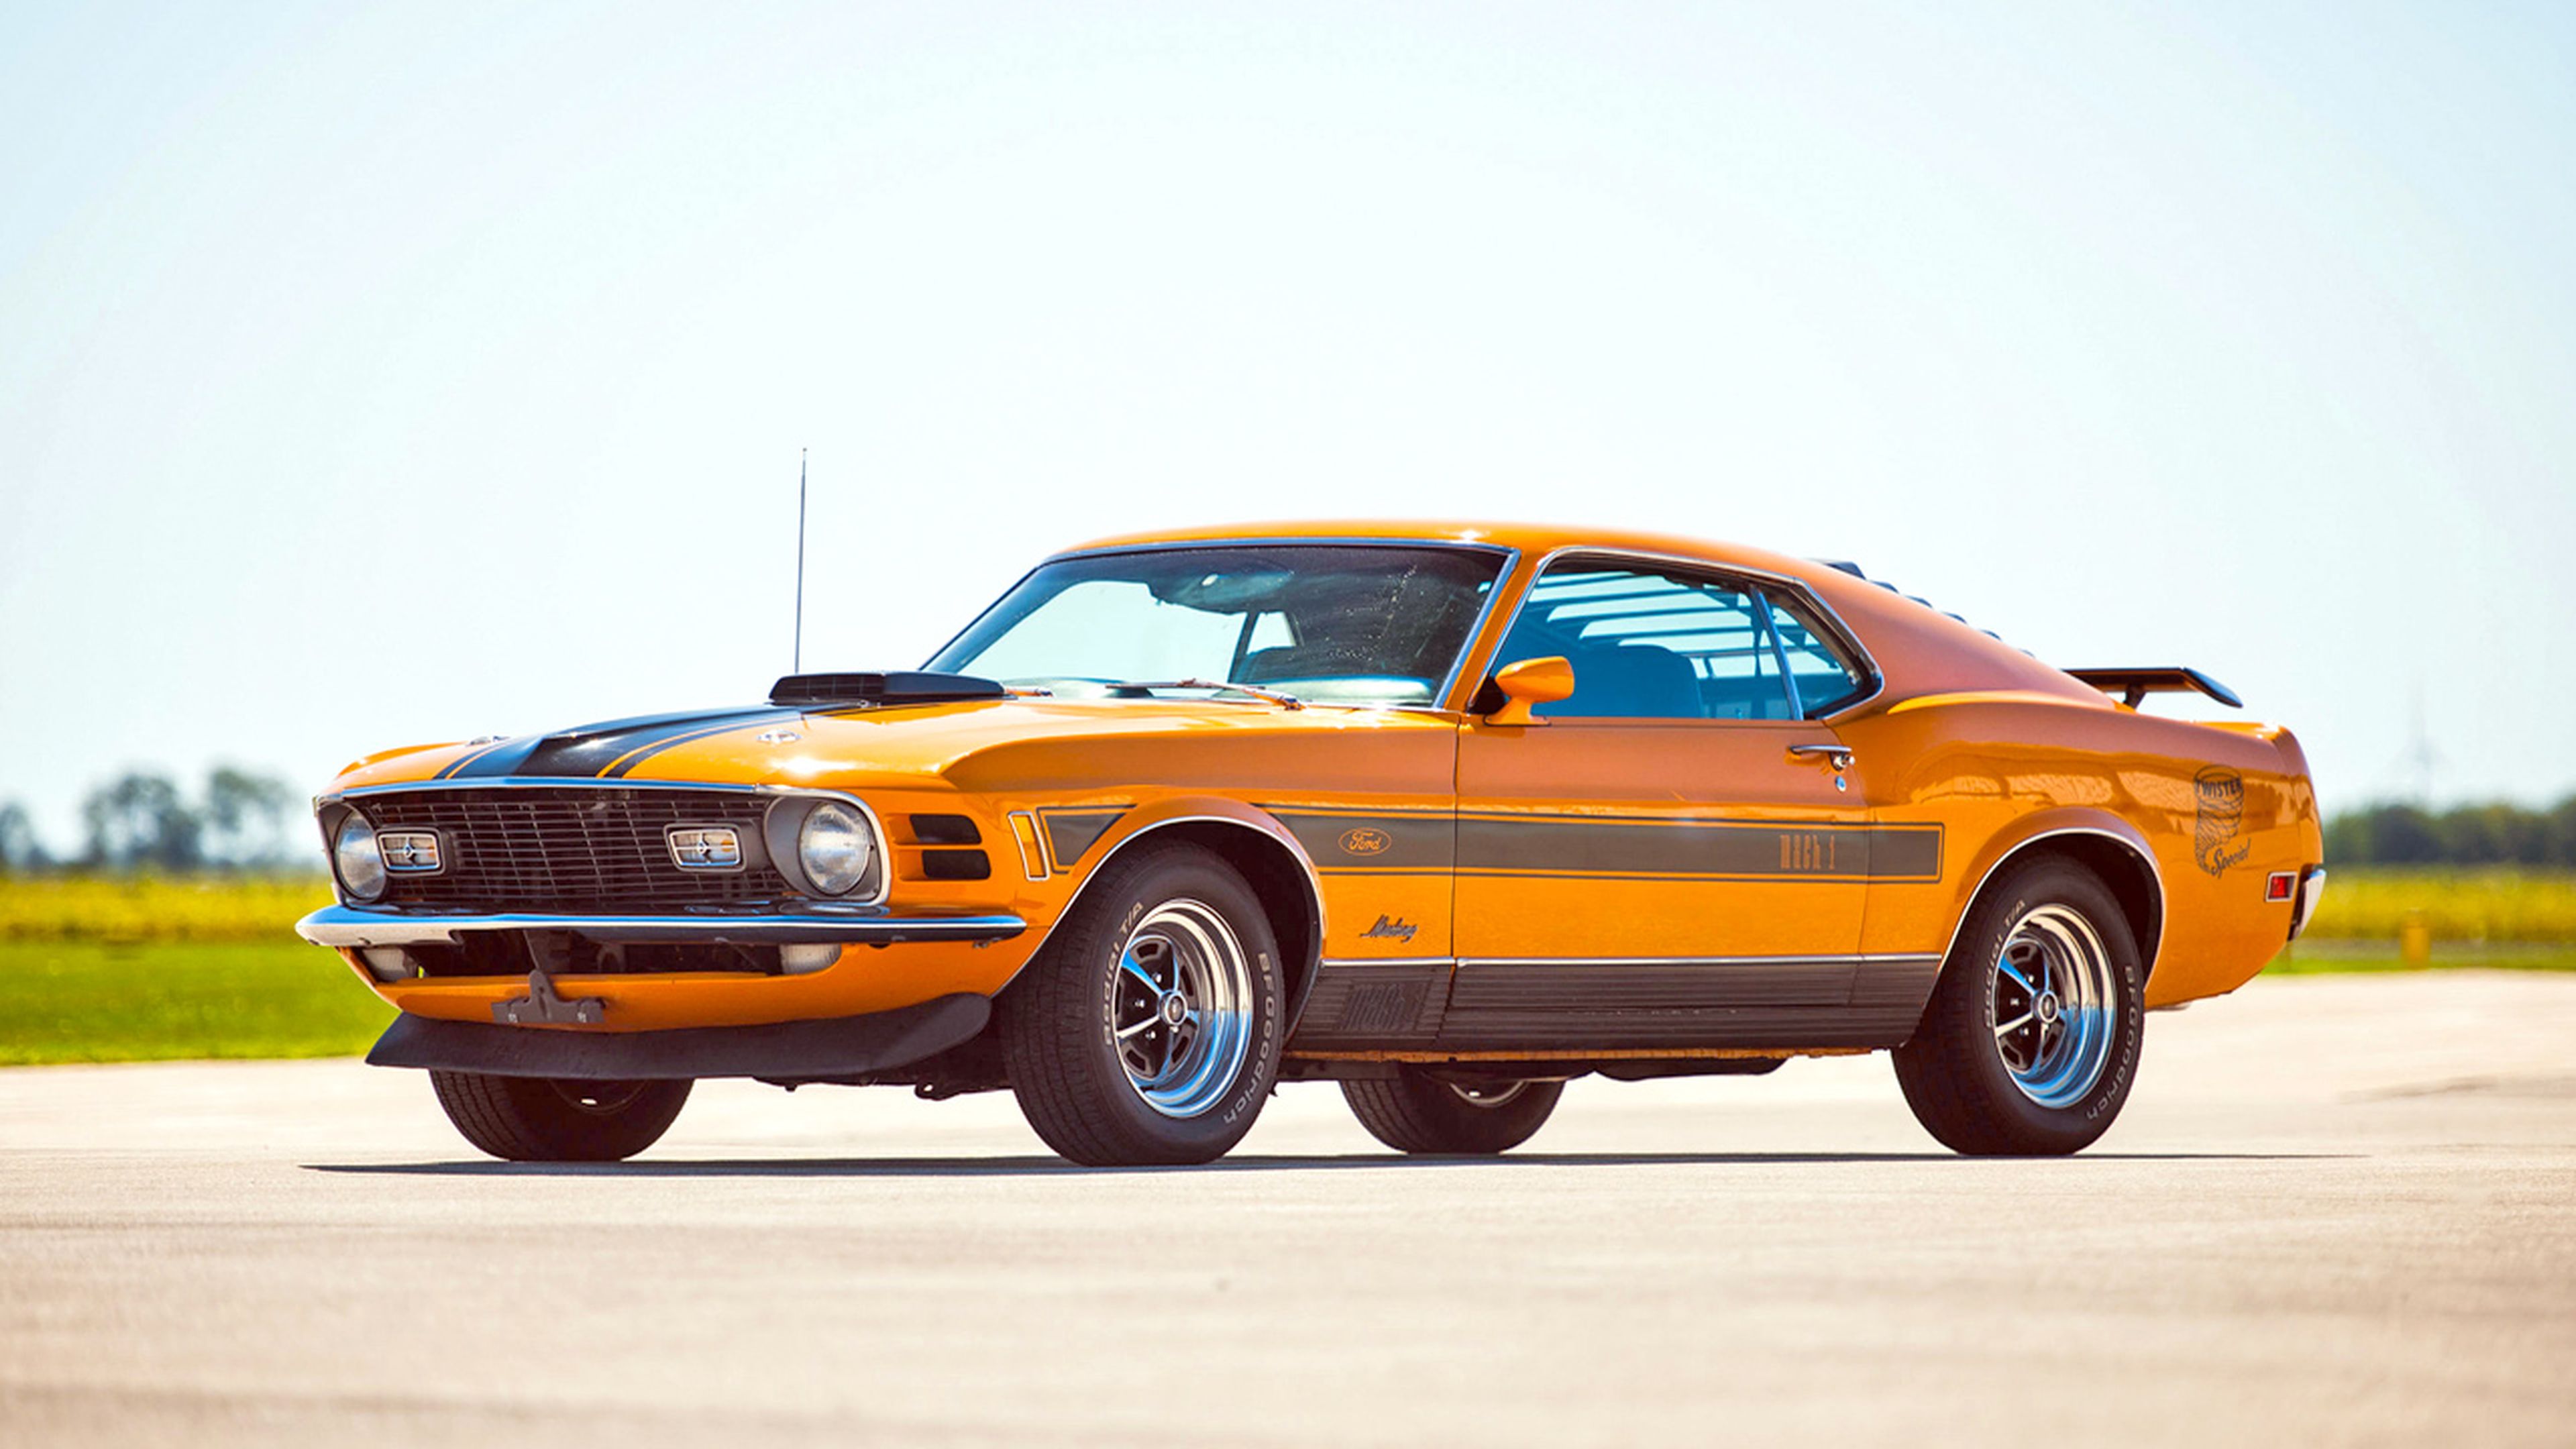 Ford Mustang Mach 1 Twister Special